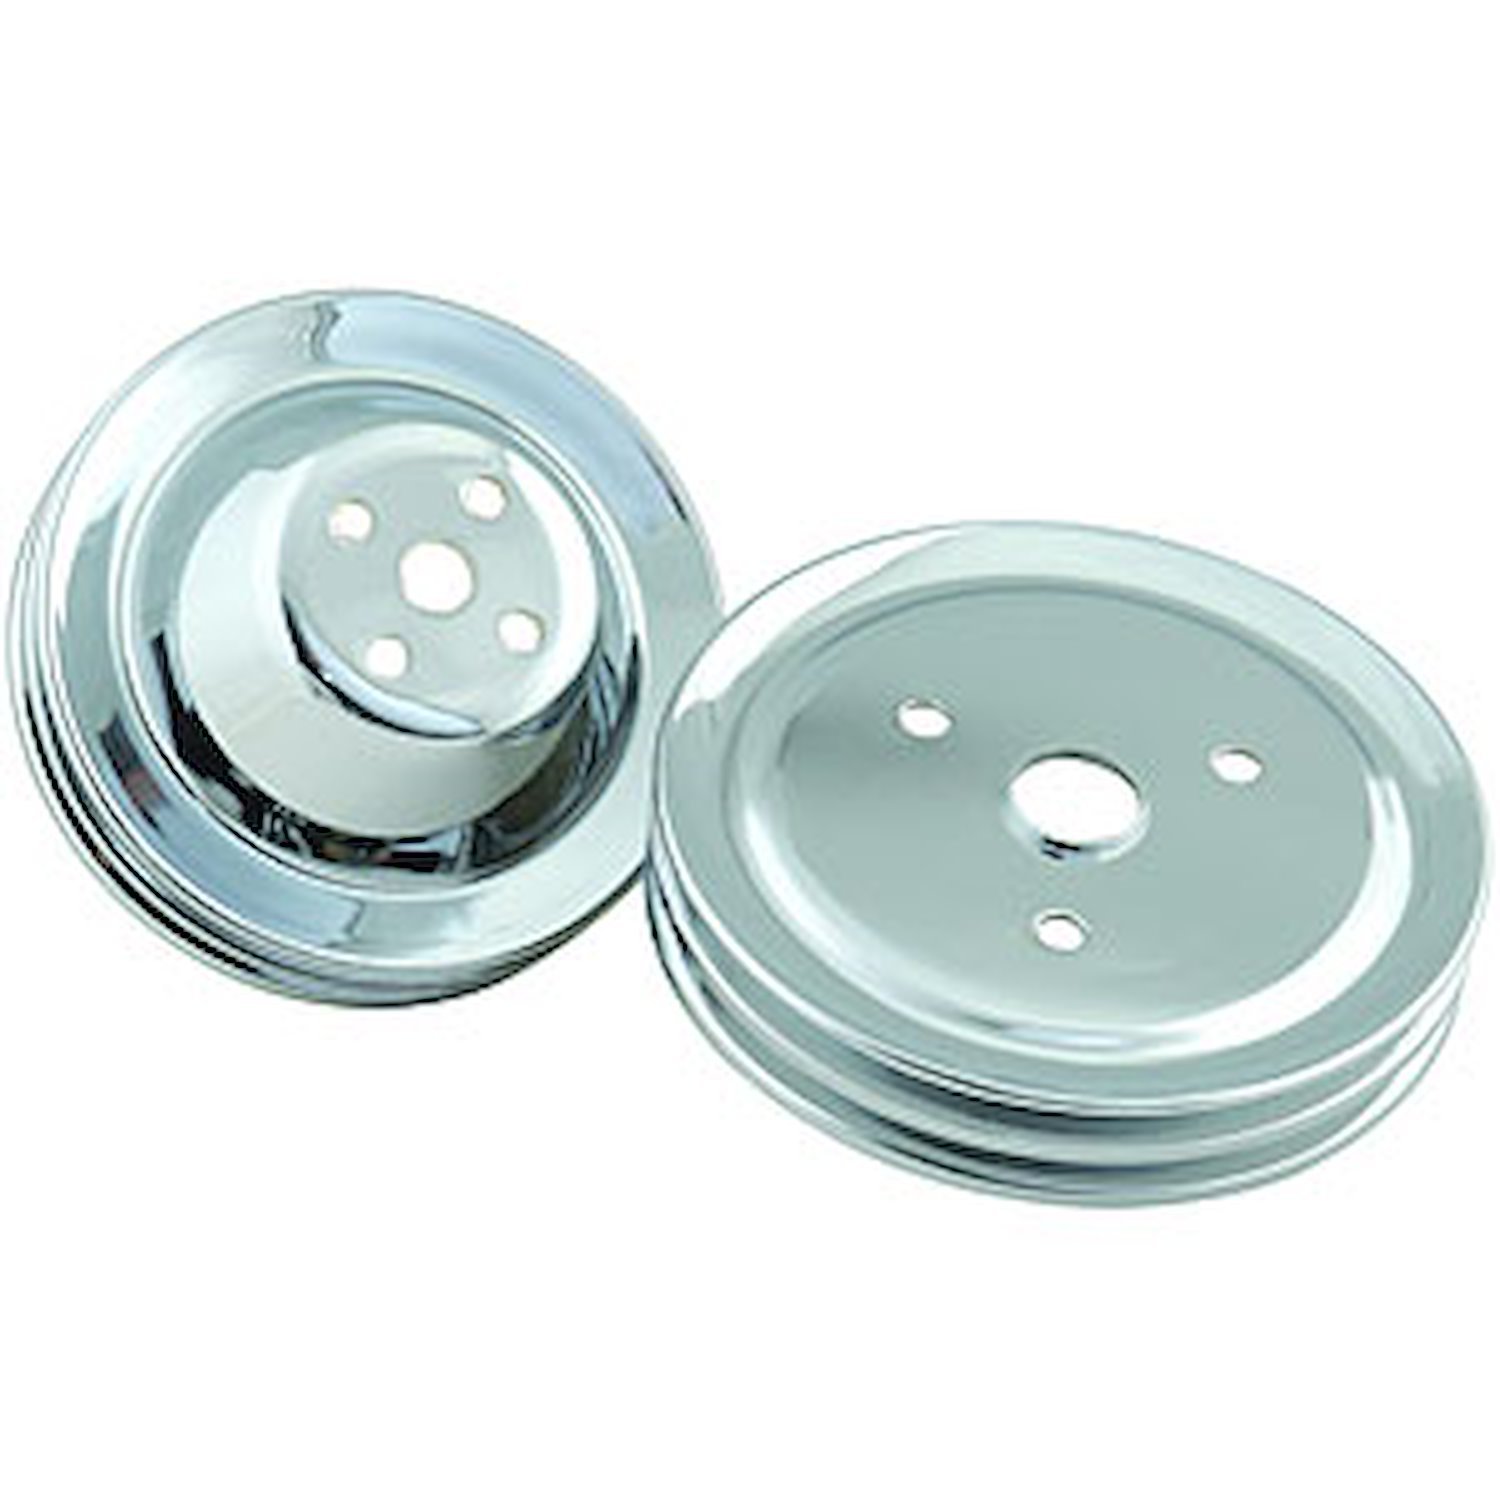 *BLEM - Chrome Pulley Set 1955-68 Small Block Chevy